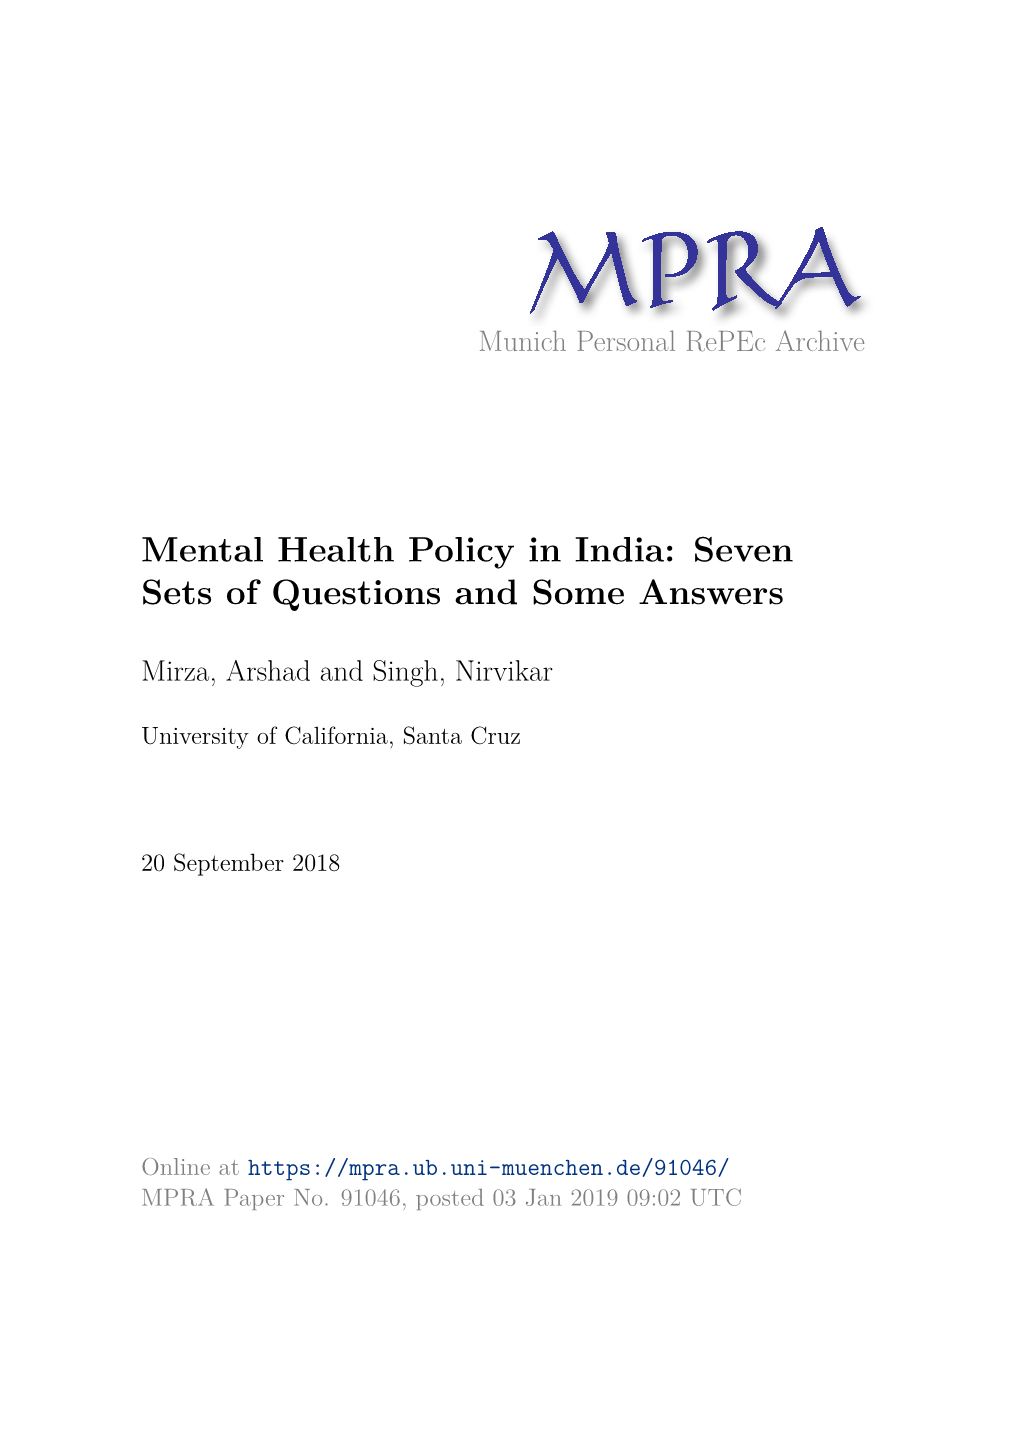 Mental Health Policy in India: Seven Sets of Questions and Some Answers